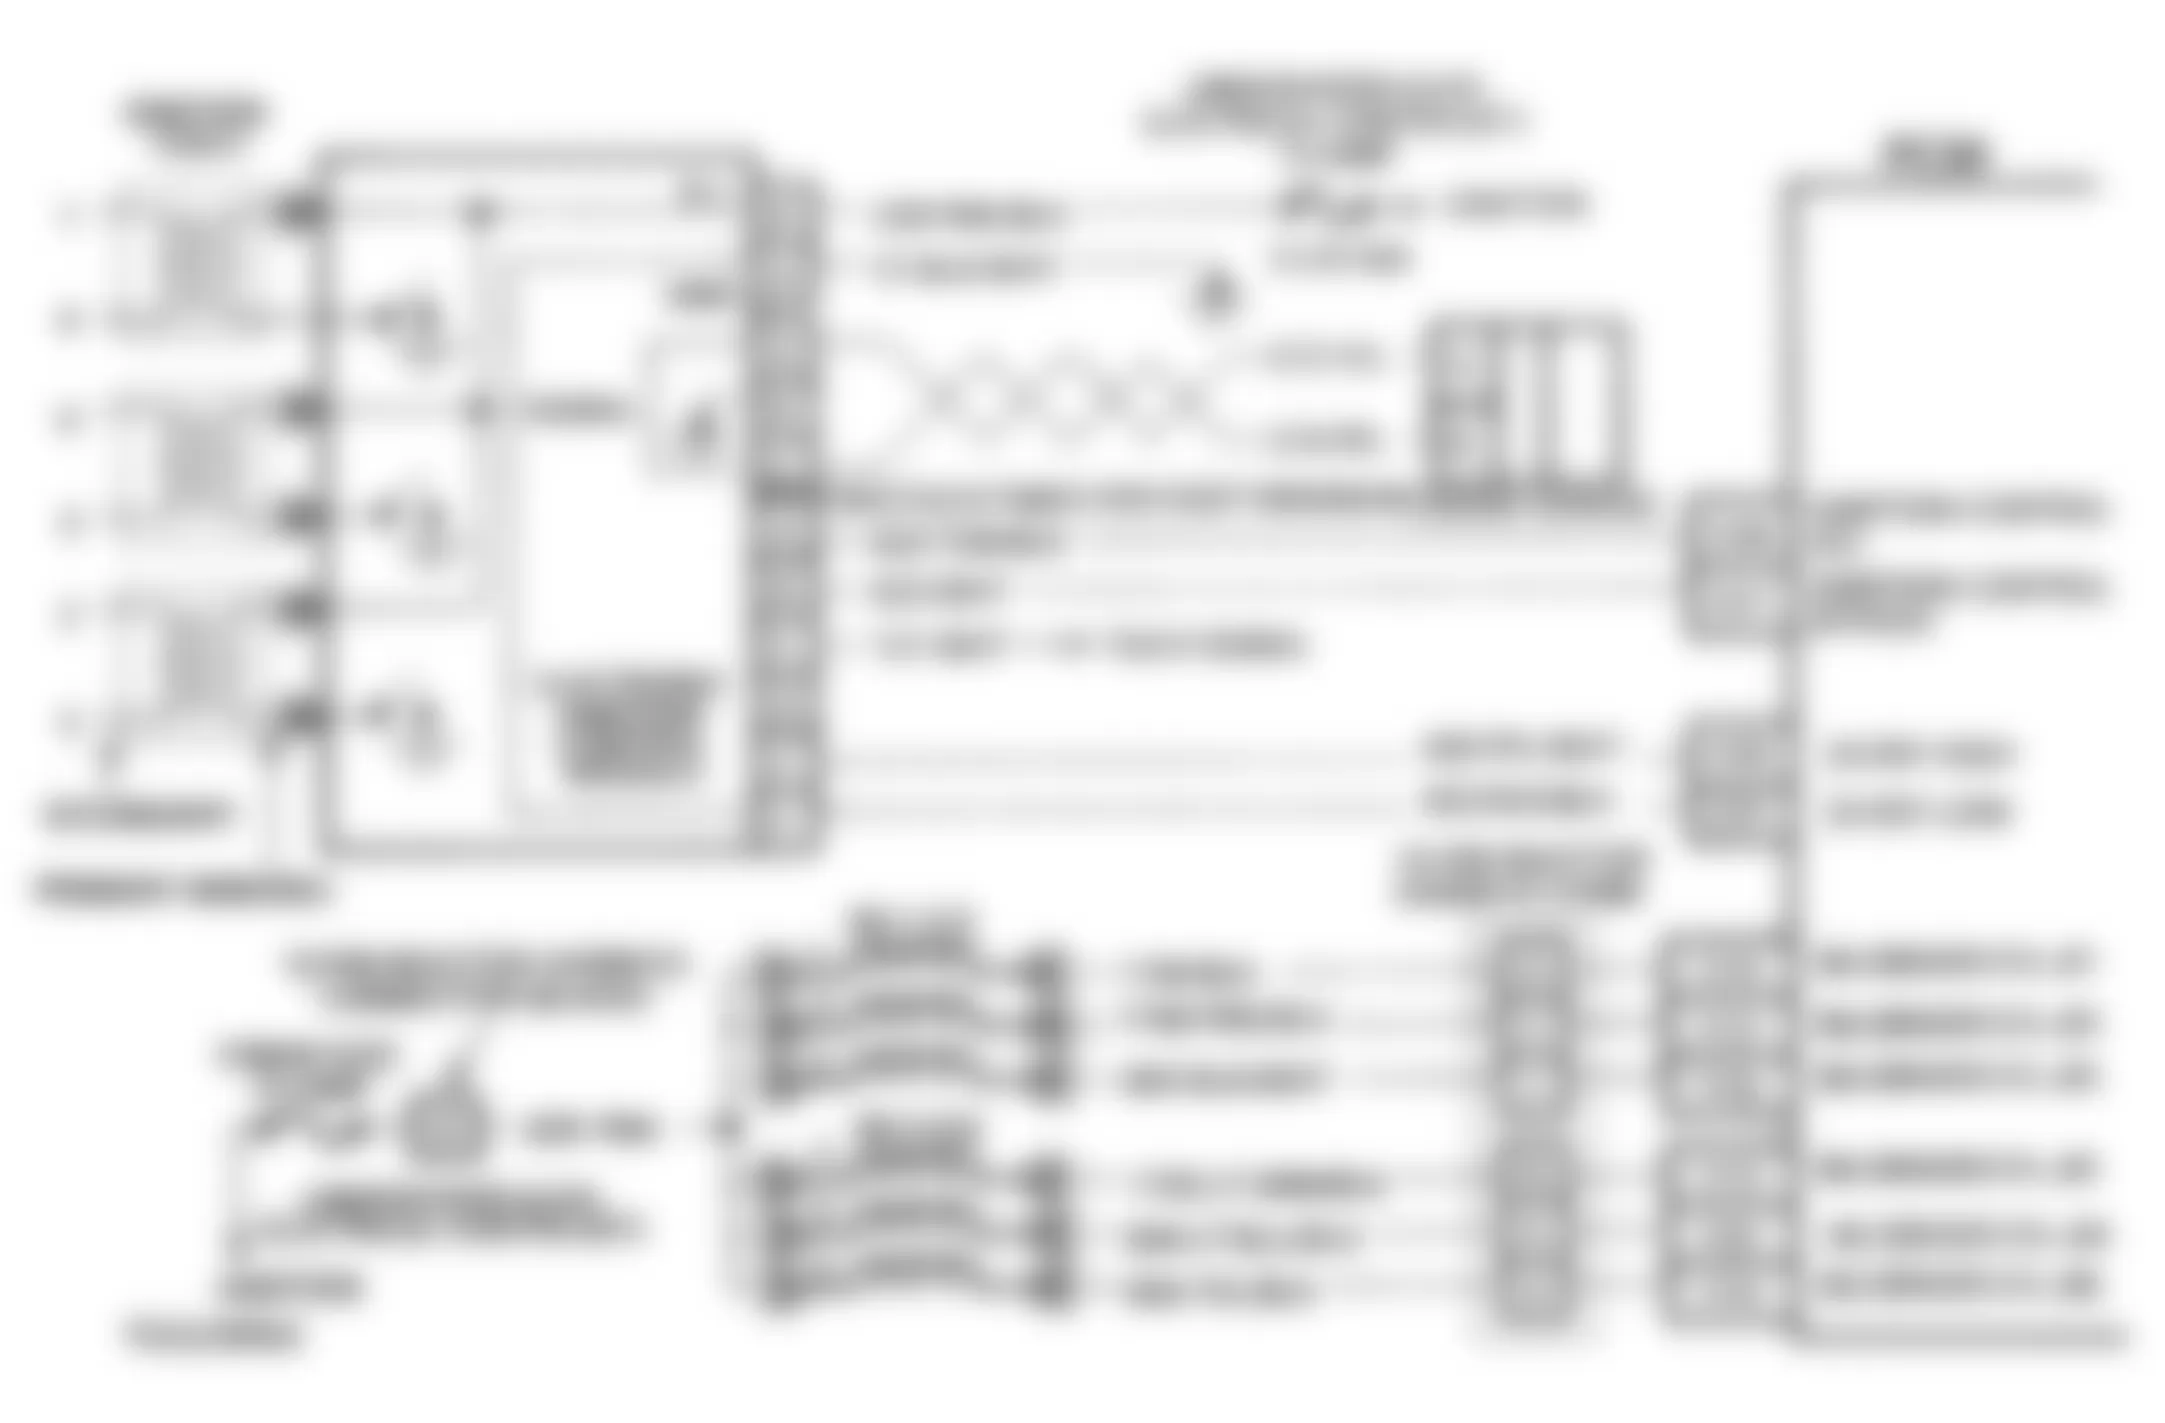 Buick Regal Limited 1994 - Component Locations -  Code 41 Schematic (3.1L) Cylinder Select Error